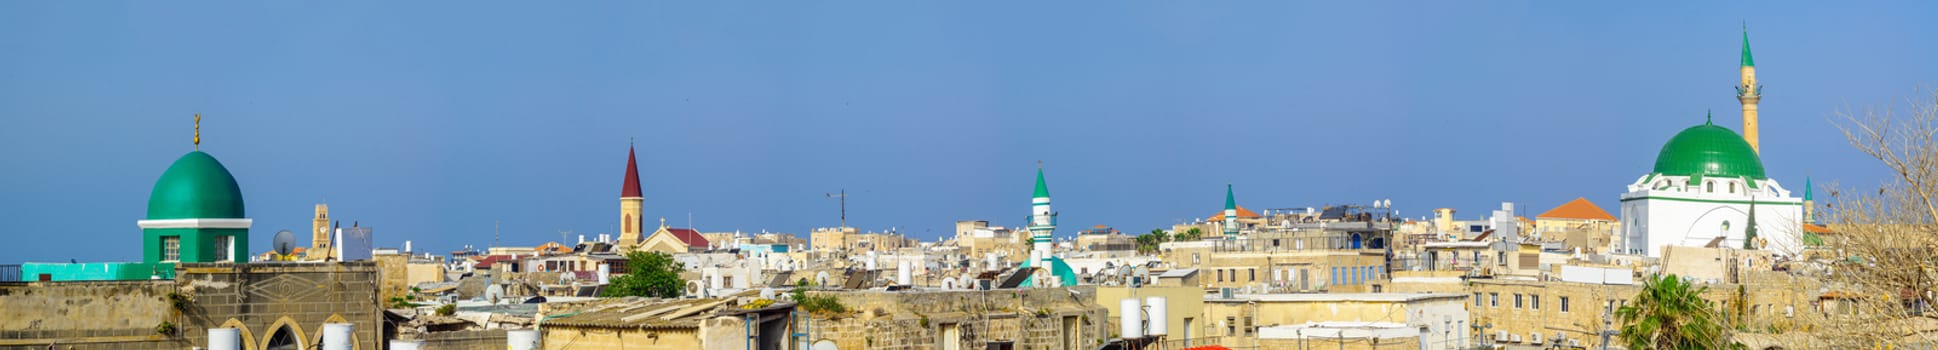 Panoramic view of the old city skyline with Ahmed el-Jazzar Mosque and other monuments, in Acre (Akko), Israel